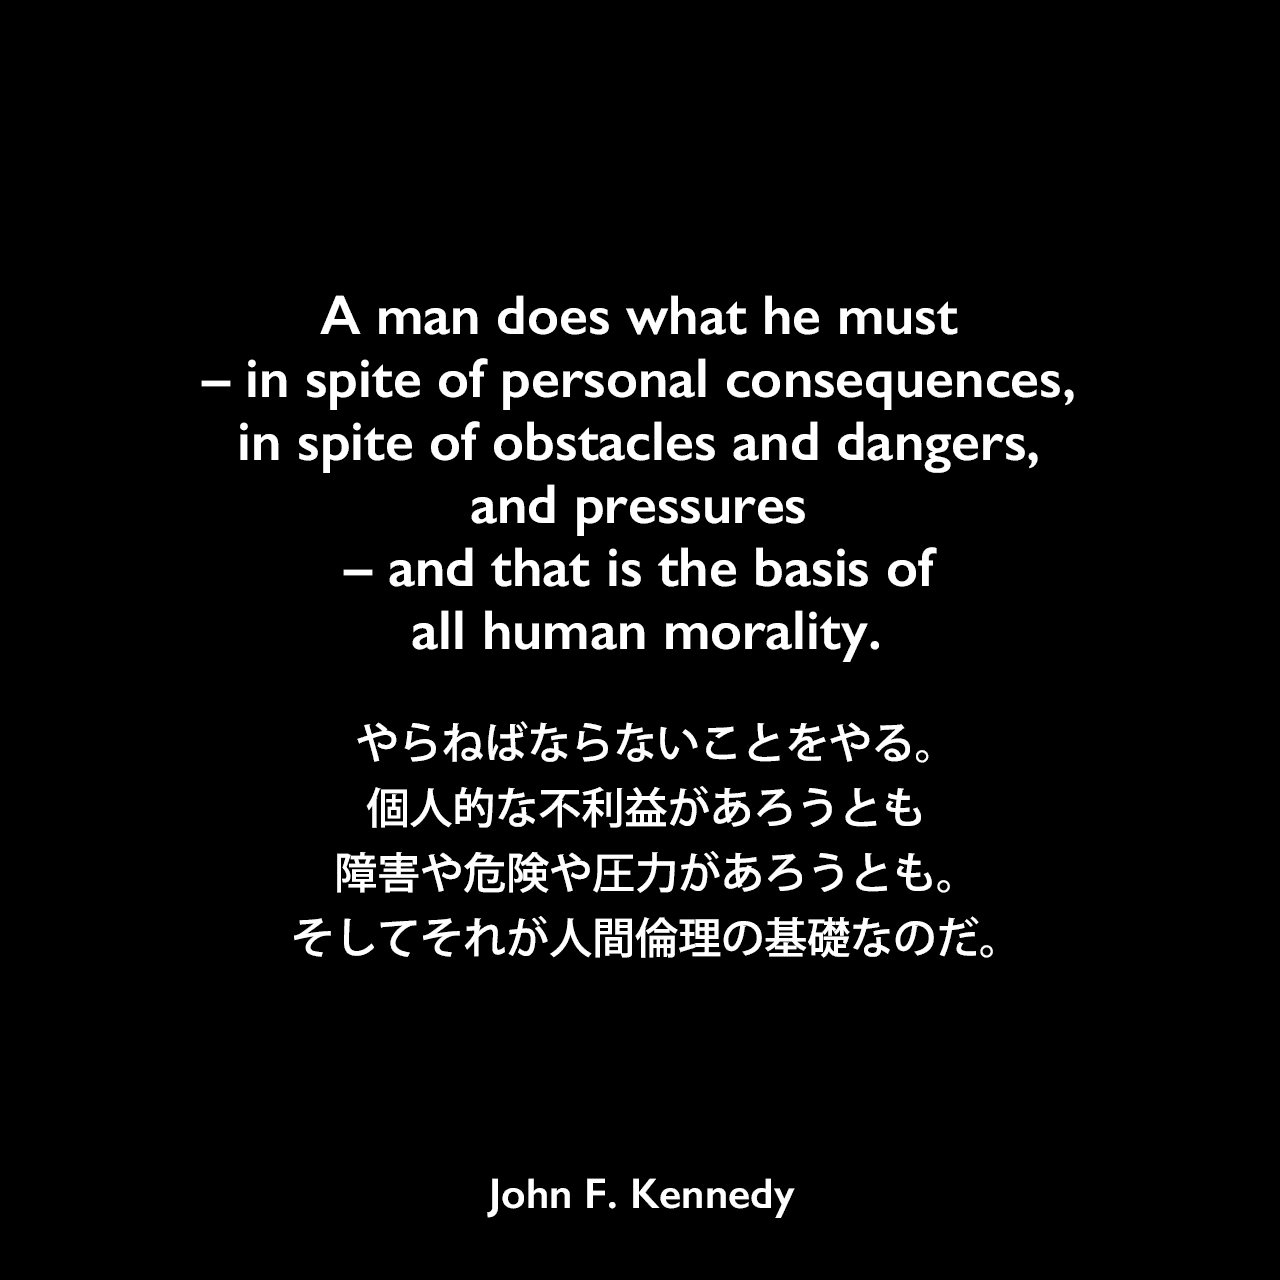 A man does what he must – in spite of personal consequences, in spite of obstacles and dangers, and pressures – and that is the basis of all human morality.やらねばならないことをやる。個人的な不利益があろうとも、障害や危険や圧力があろうとも。そしてそれが人間倫理の基礎なのだ。- ケネディの本「Profiles in Courage」よりJohn F Kennedy